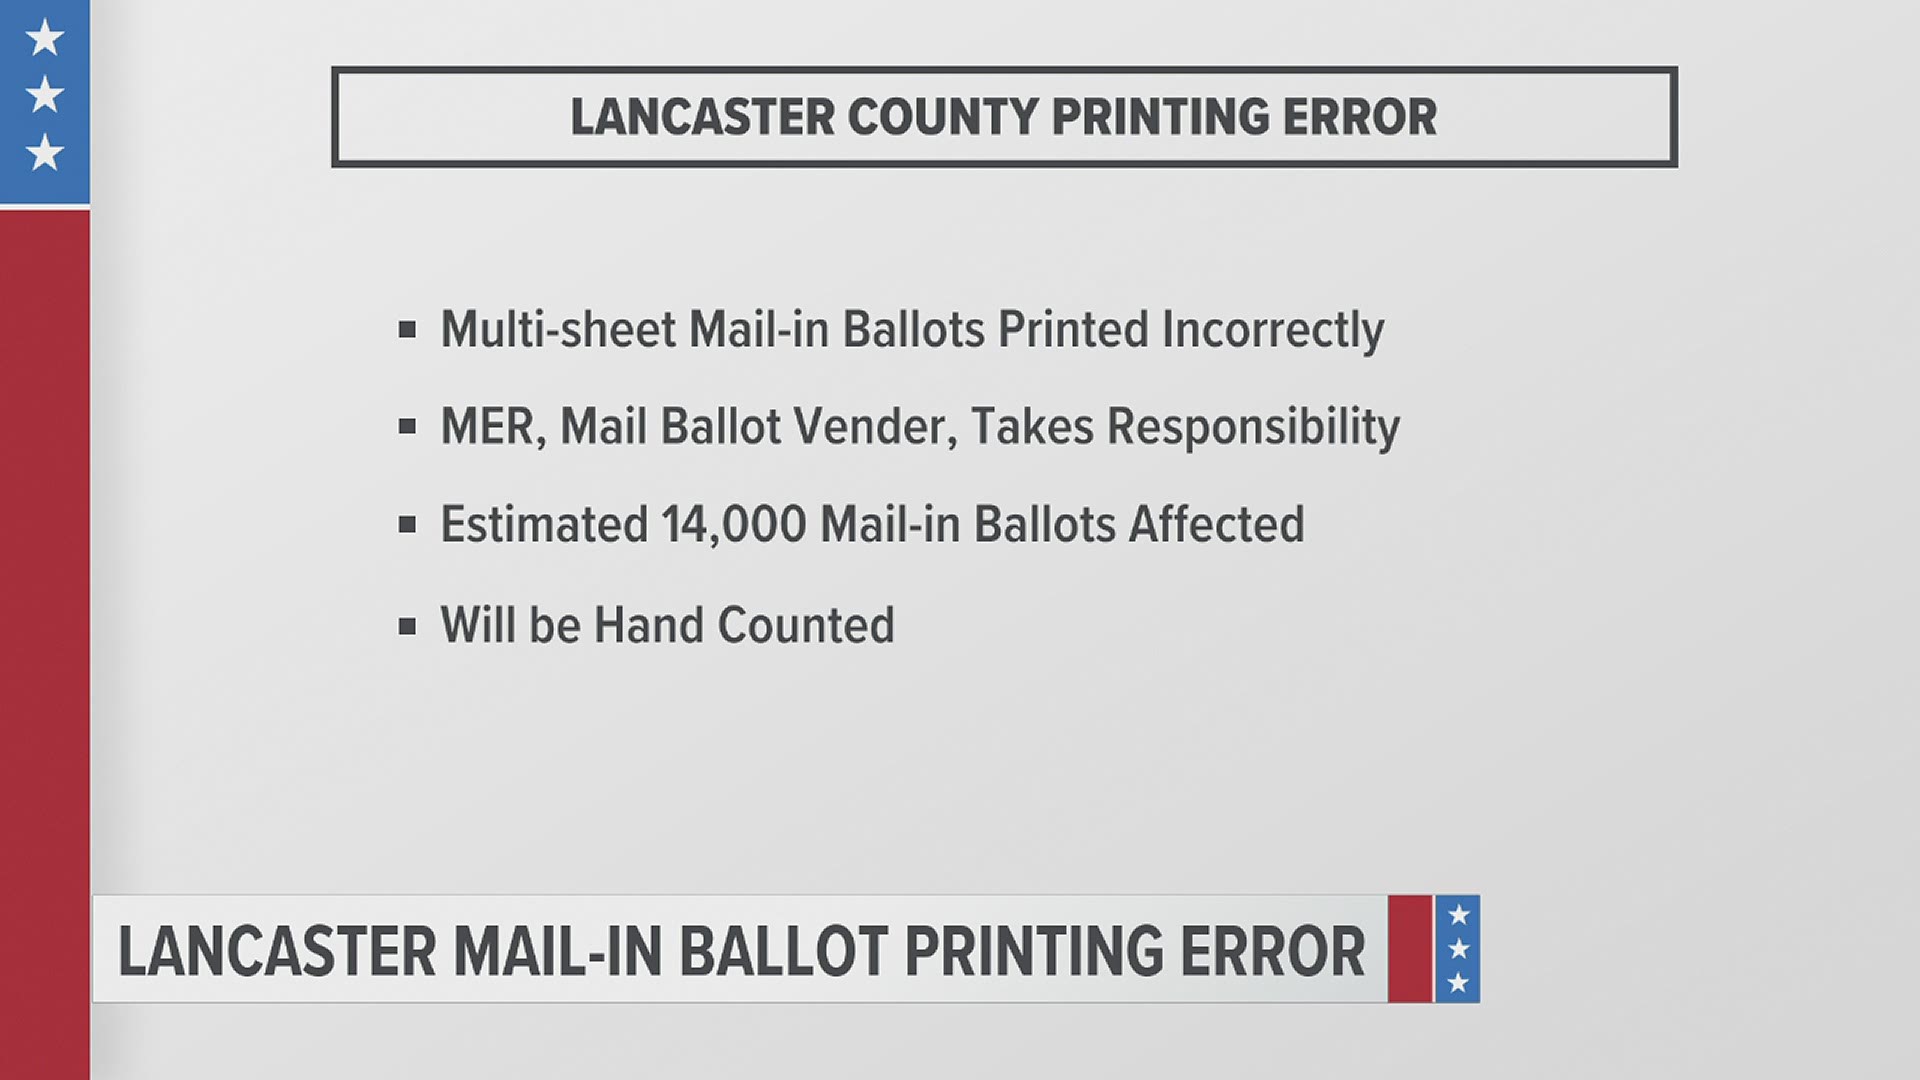 Ballots that do not scan properly will be set aside and counted by hand in the presence of poll watchers, according to the Board of Elections.